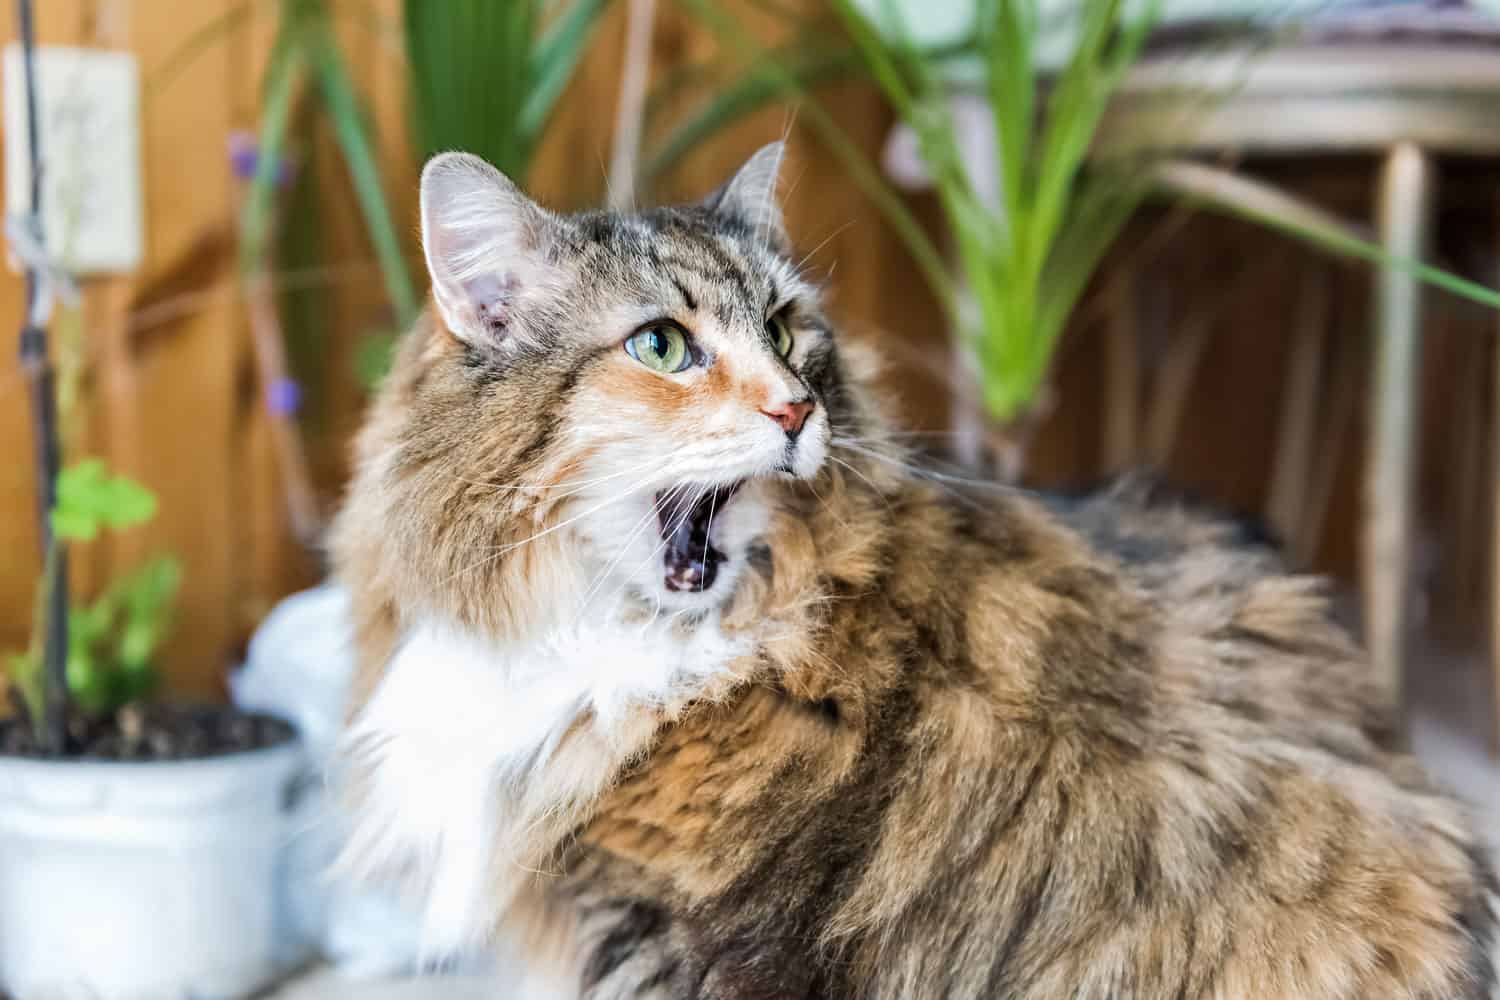 Closeup portrait of calico maine coon cat sitting eating open mouth shocked facial expression funny, toothless, sunny day kitchen, green plants
